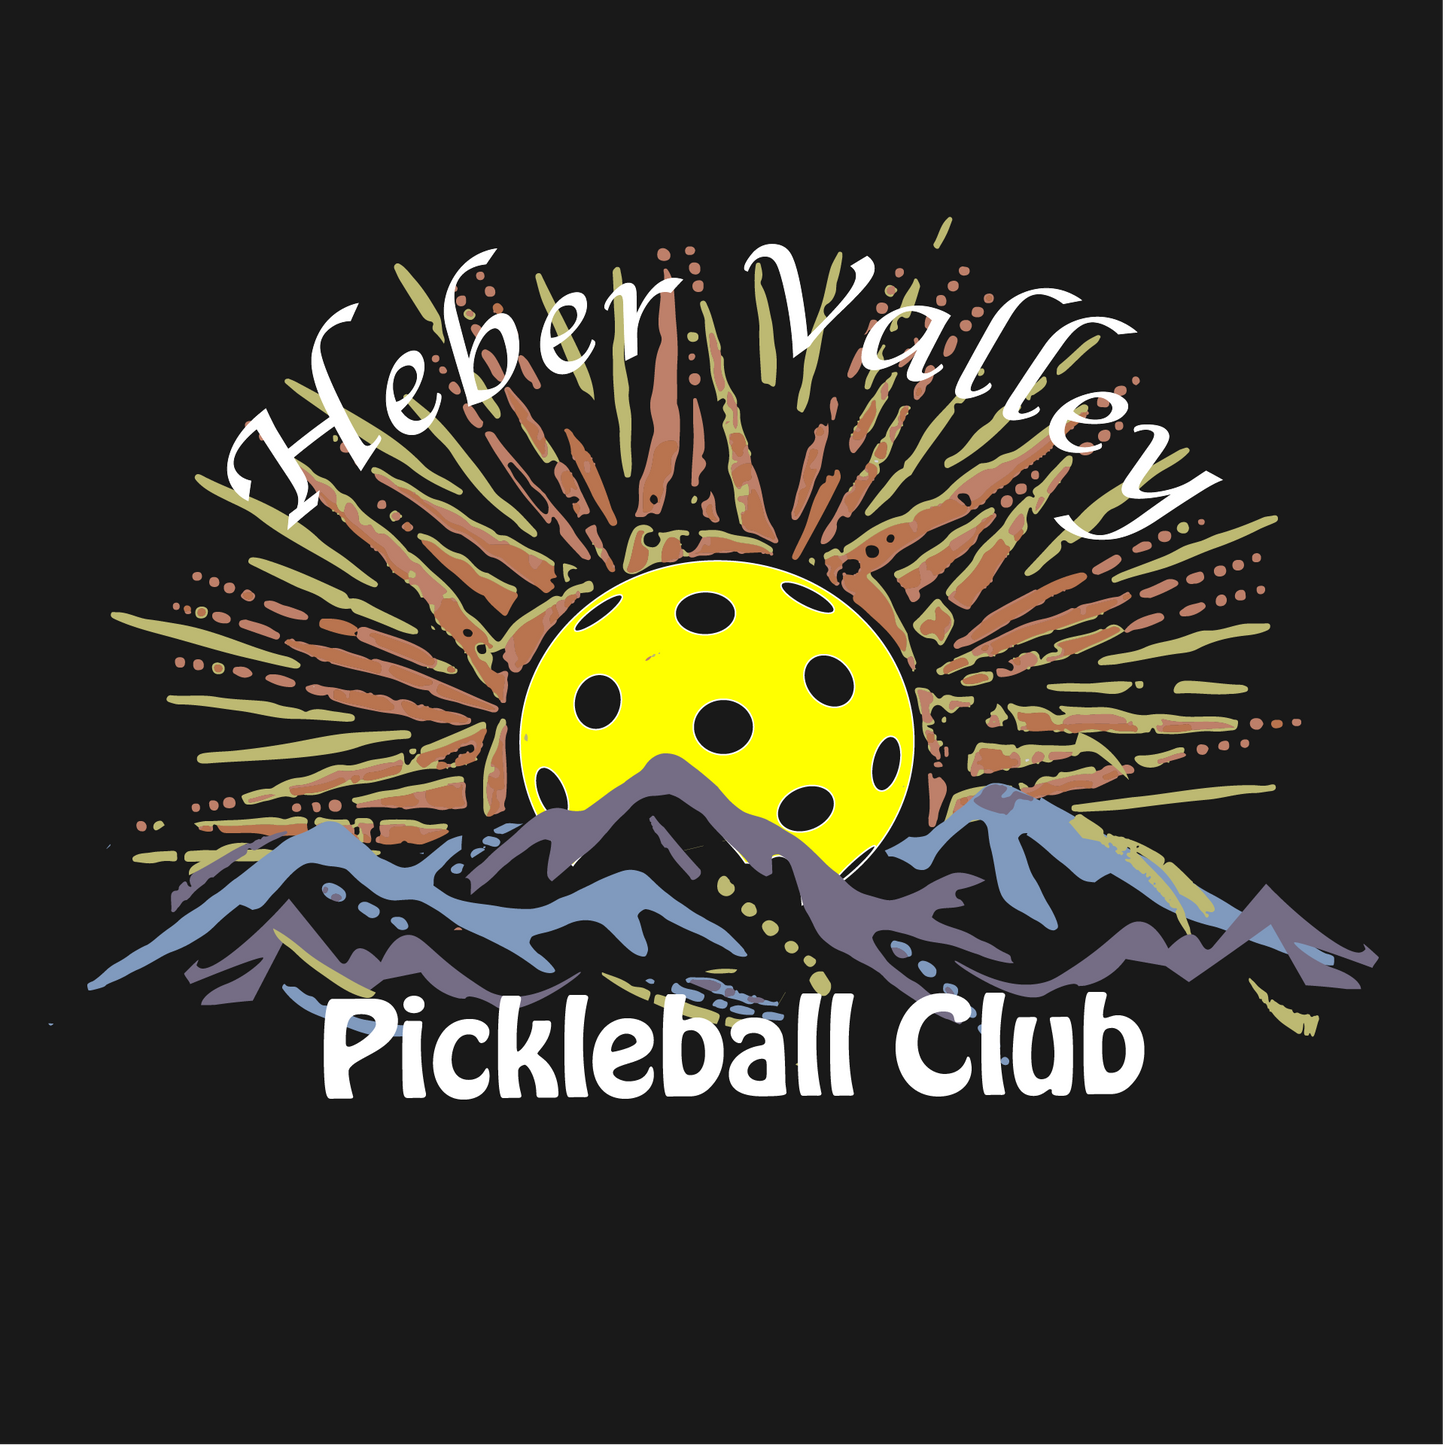 Heber Valley Pickleball Club (Large) | Women's Long Sleeve Scoop Neck Pickleball Shirts | 75/13/12 poly/cotton/rayon